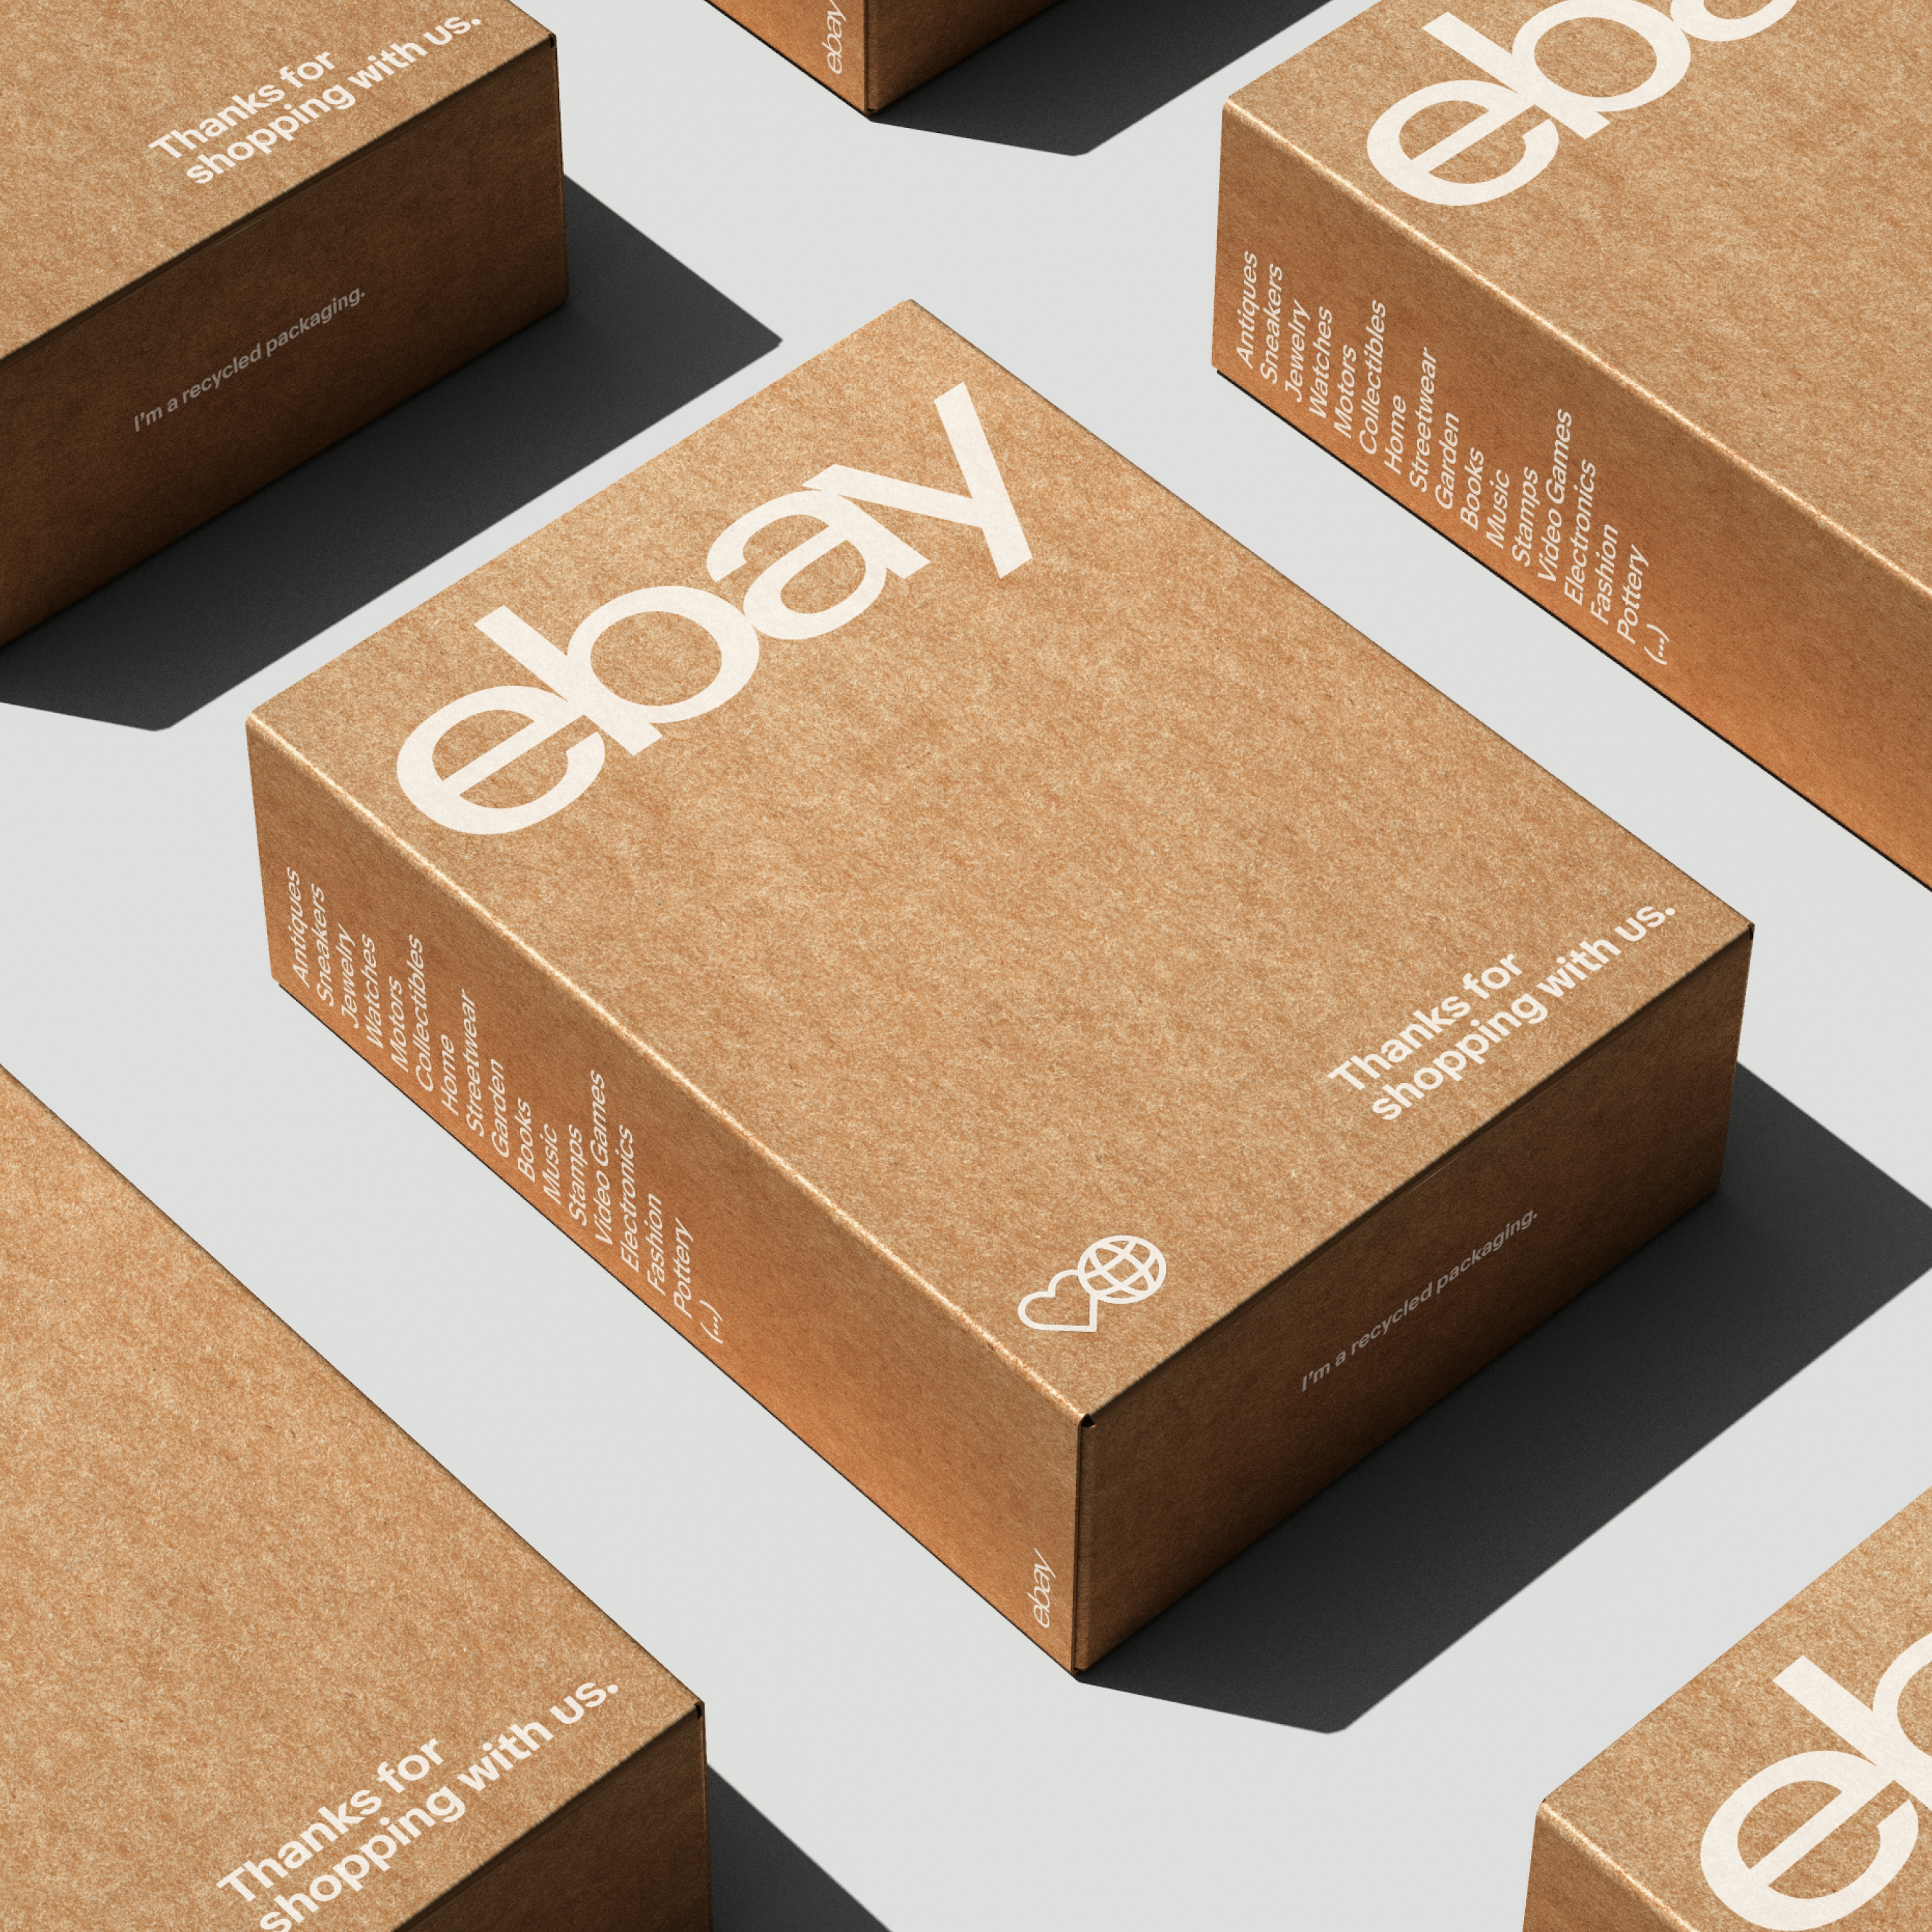 eBay packaging in a grid on a gray table. The boxes are brown cardboard with white type, logo, and icons.